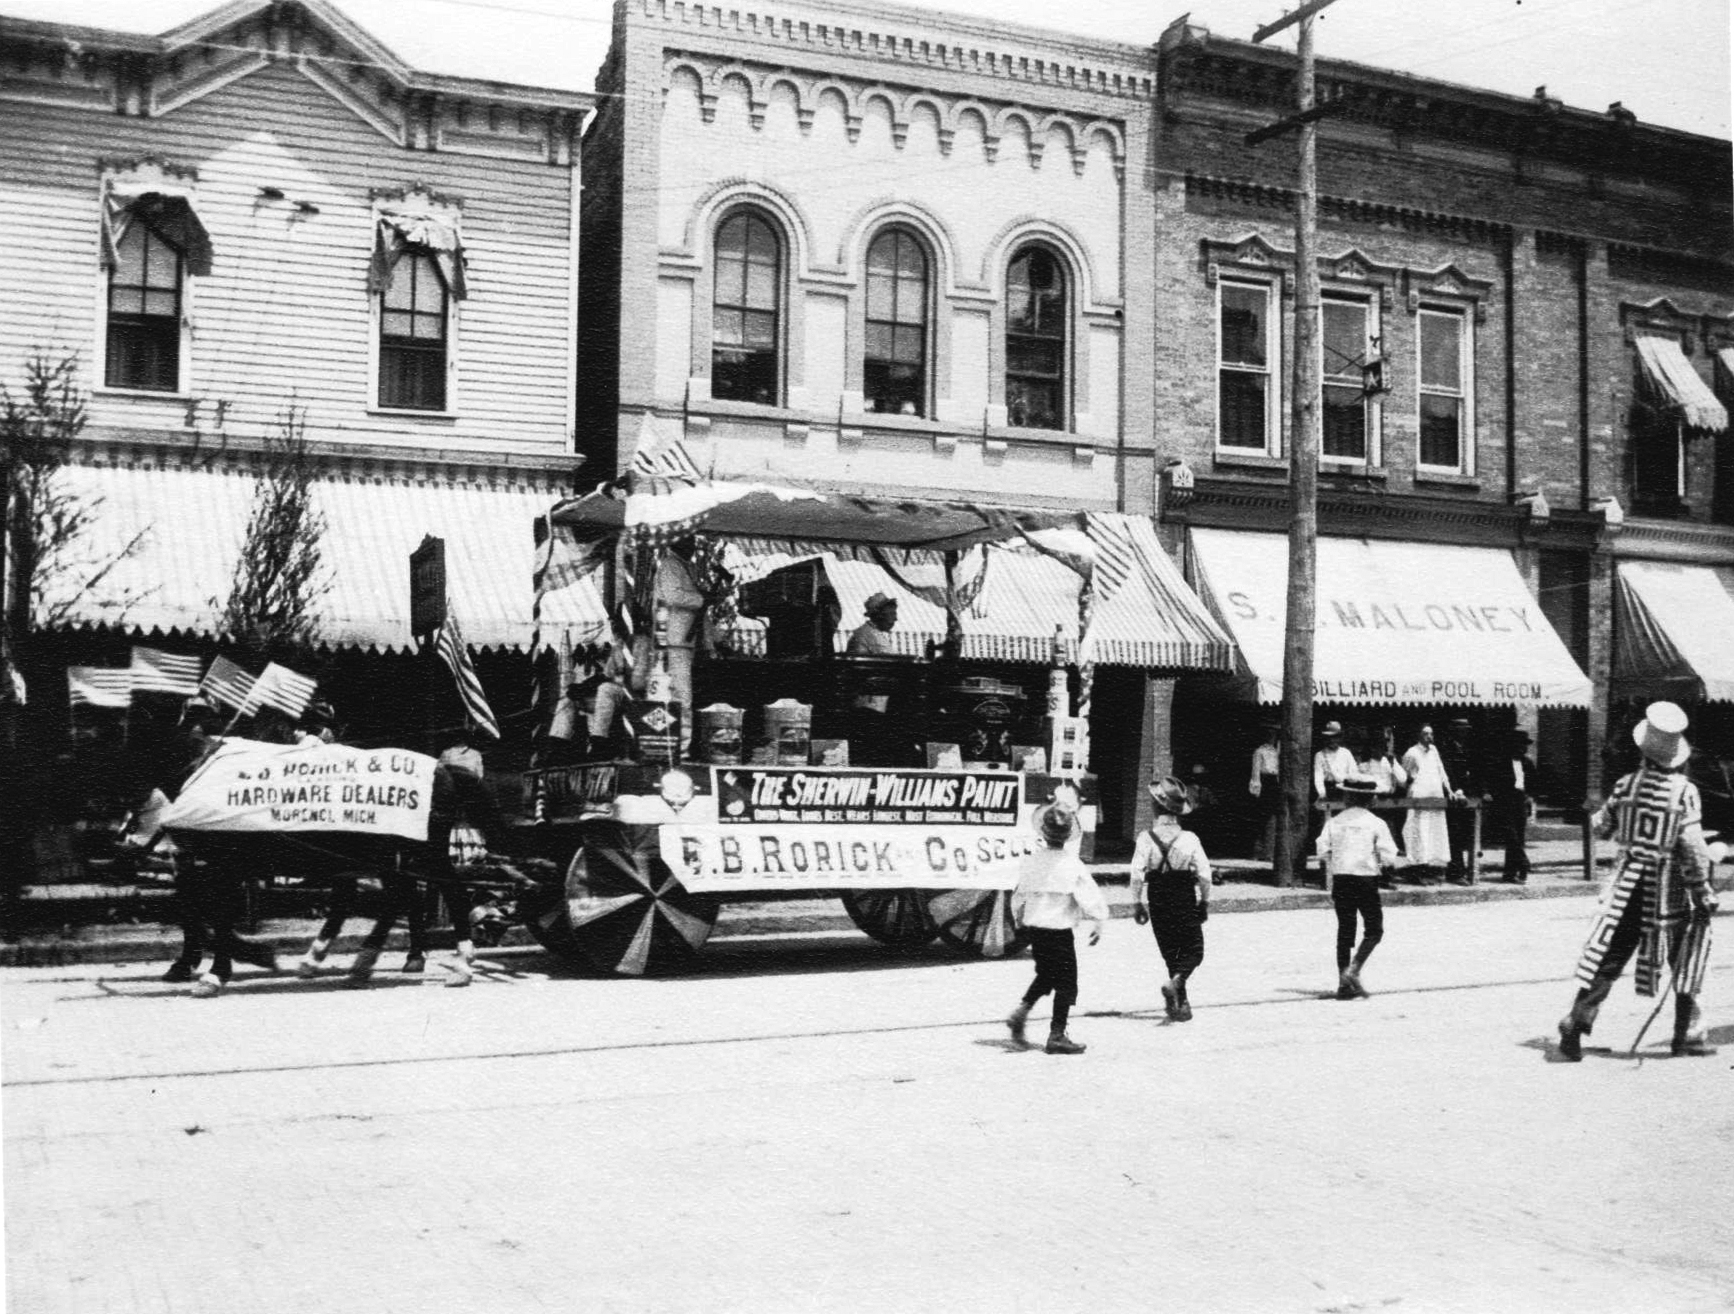 W. Main Street, Morenci, Michigan (north side).  Spence Maloney’s Saloon, E. B. Rorick & Co. Parade float – after 1902 (in front of present-day Sipel Bldg., 224 W. Main)